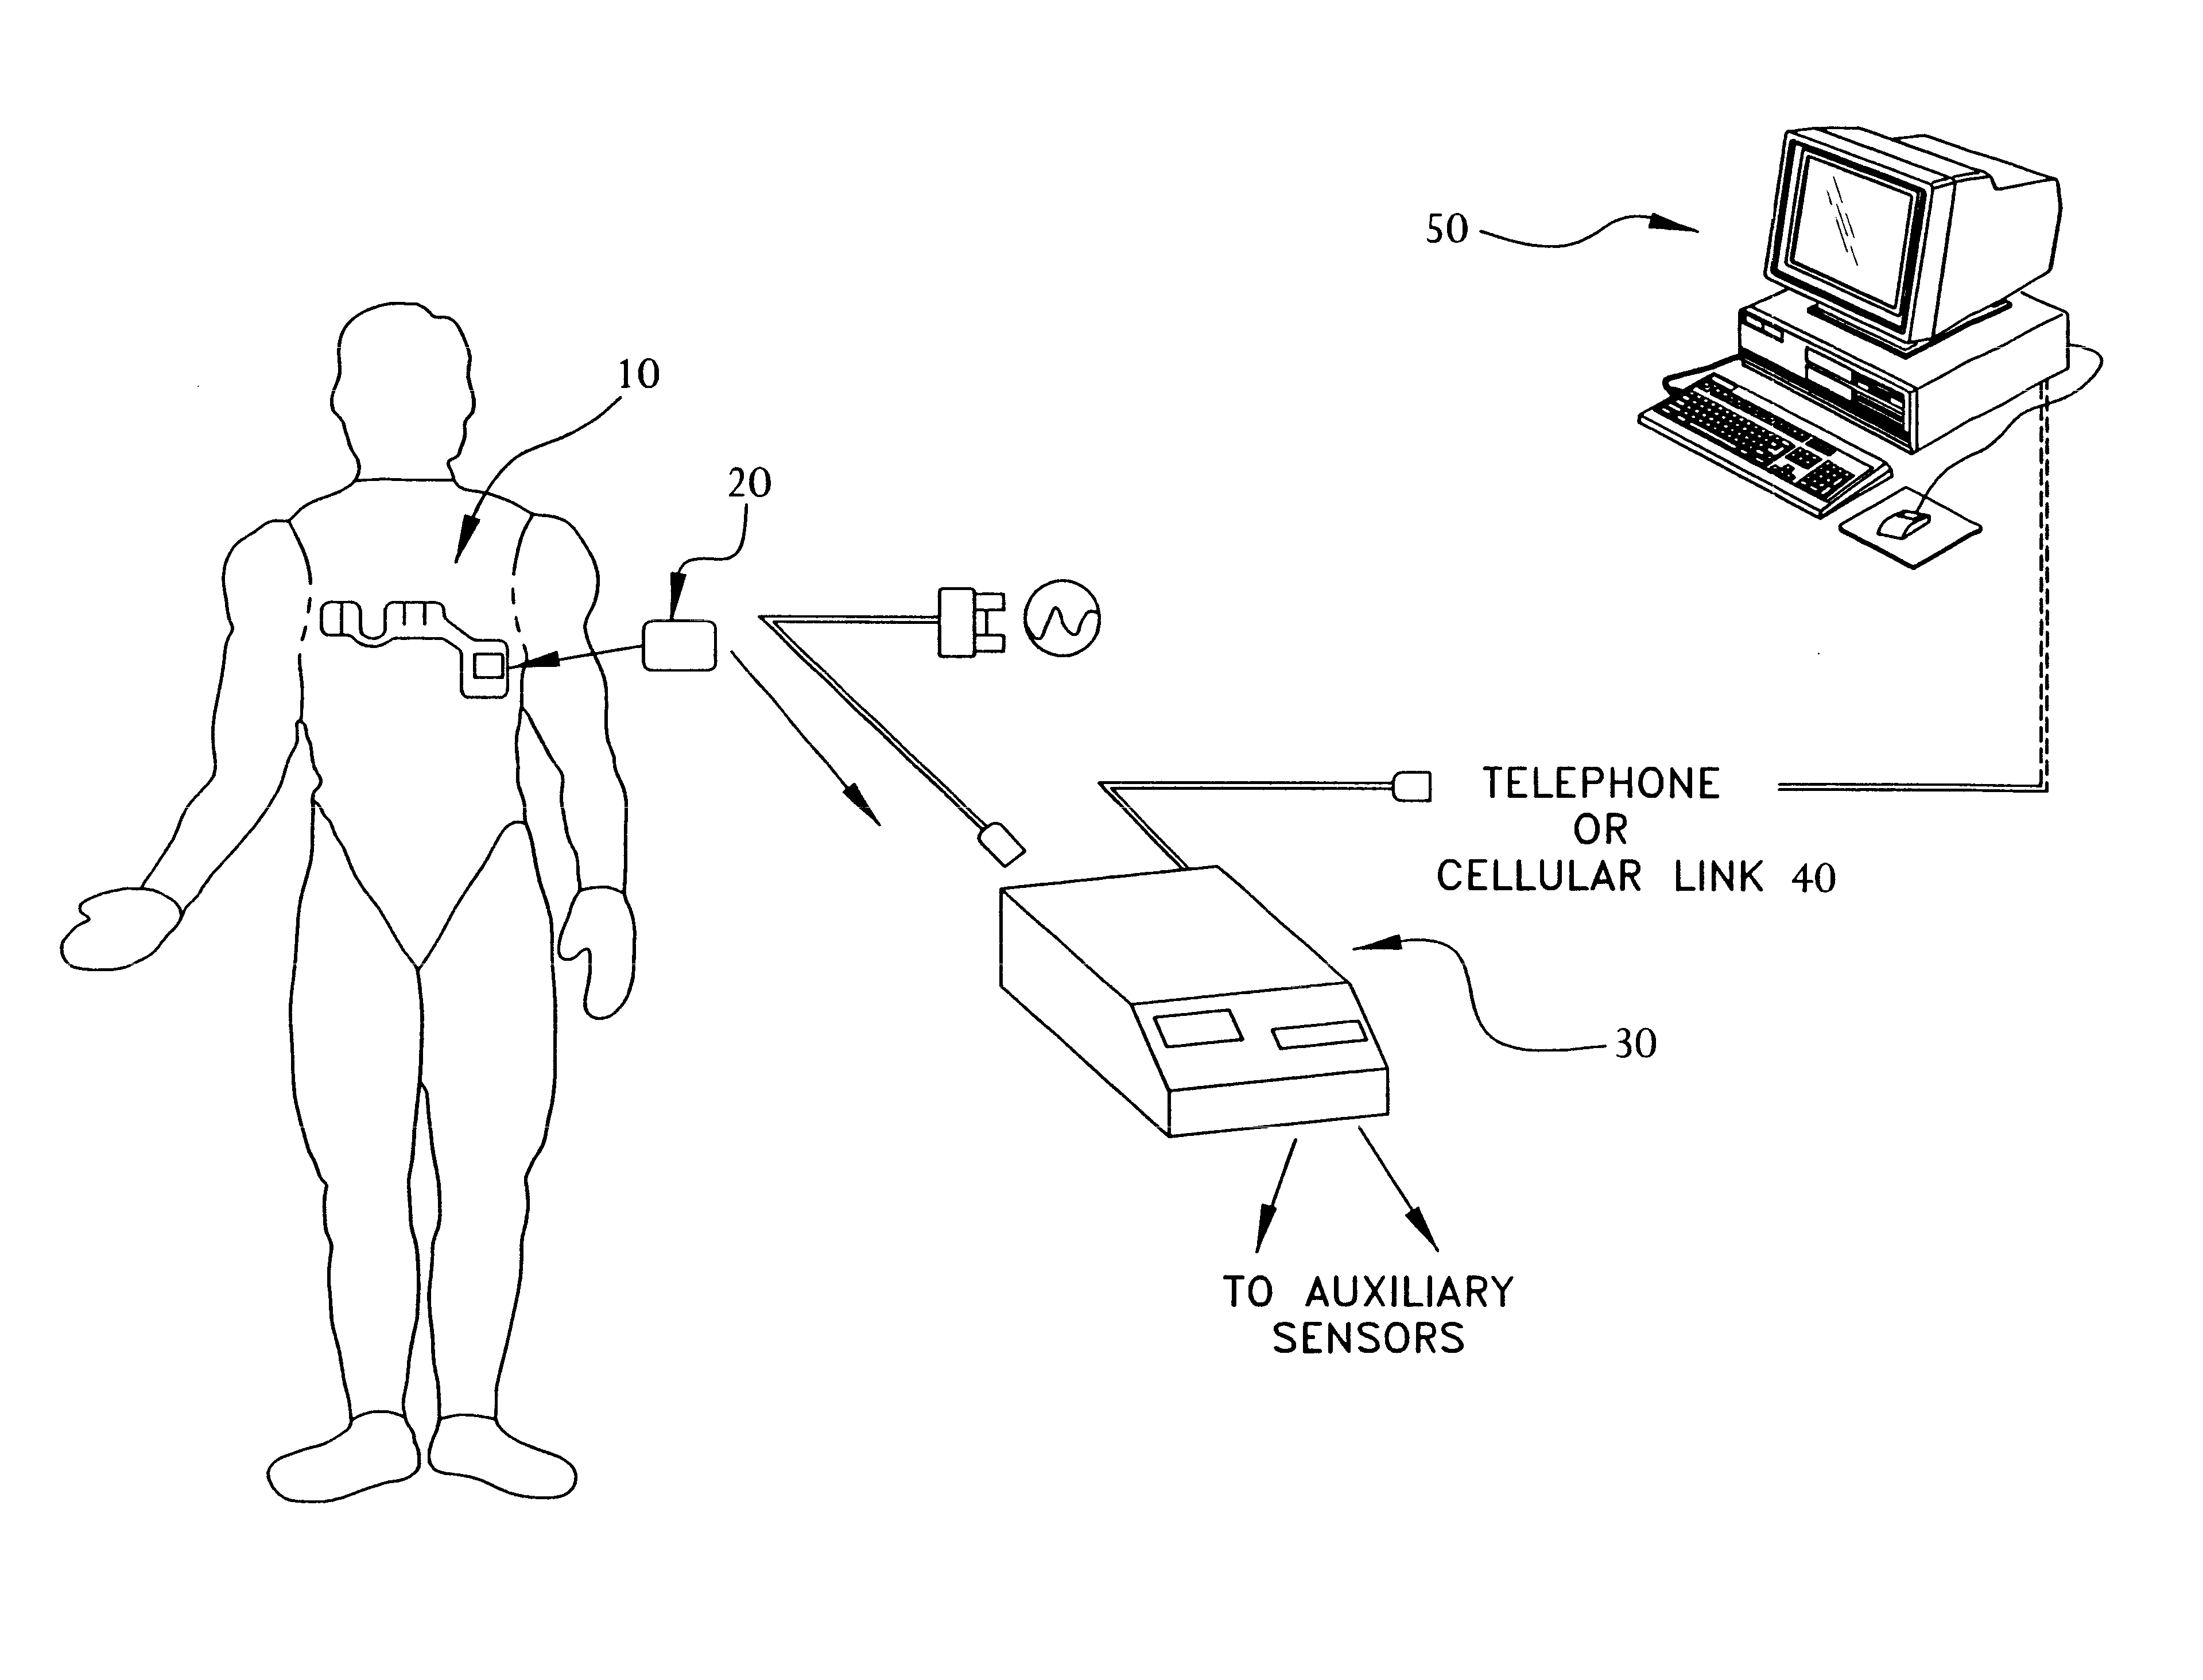 Portable remote patient telemonitoring system using a memory card or smart card